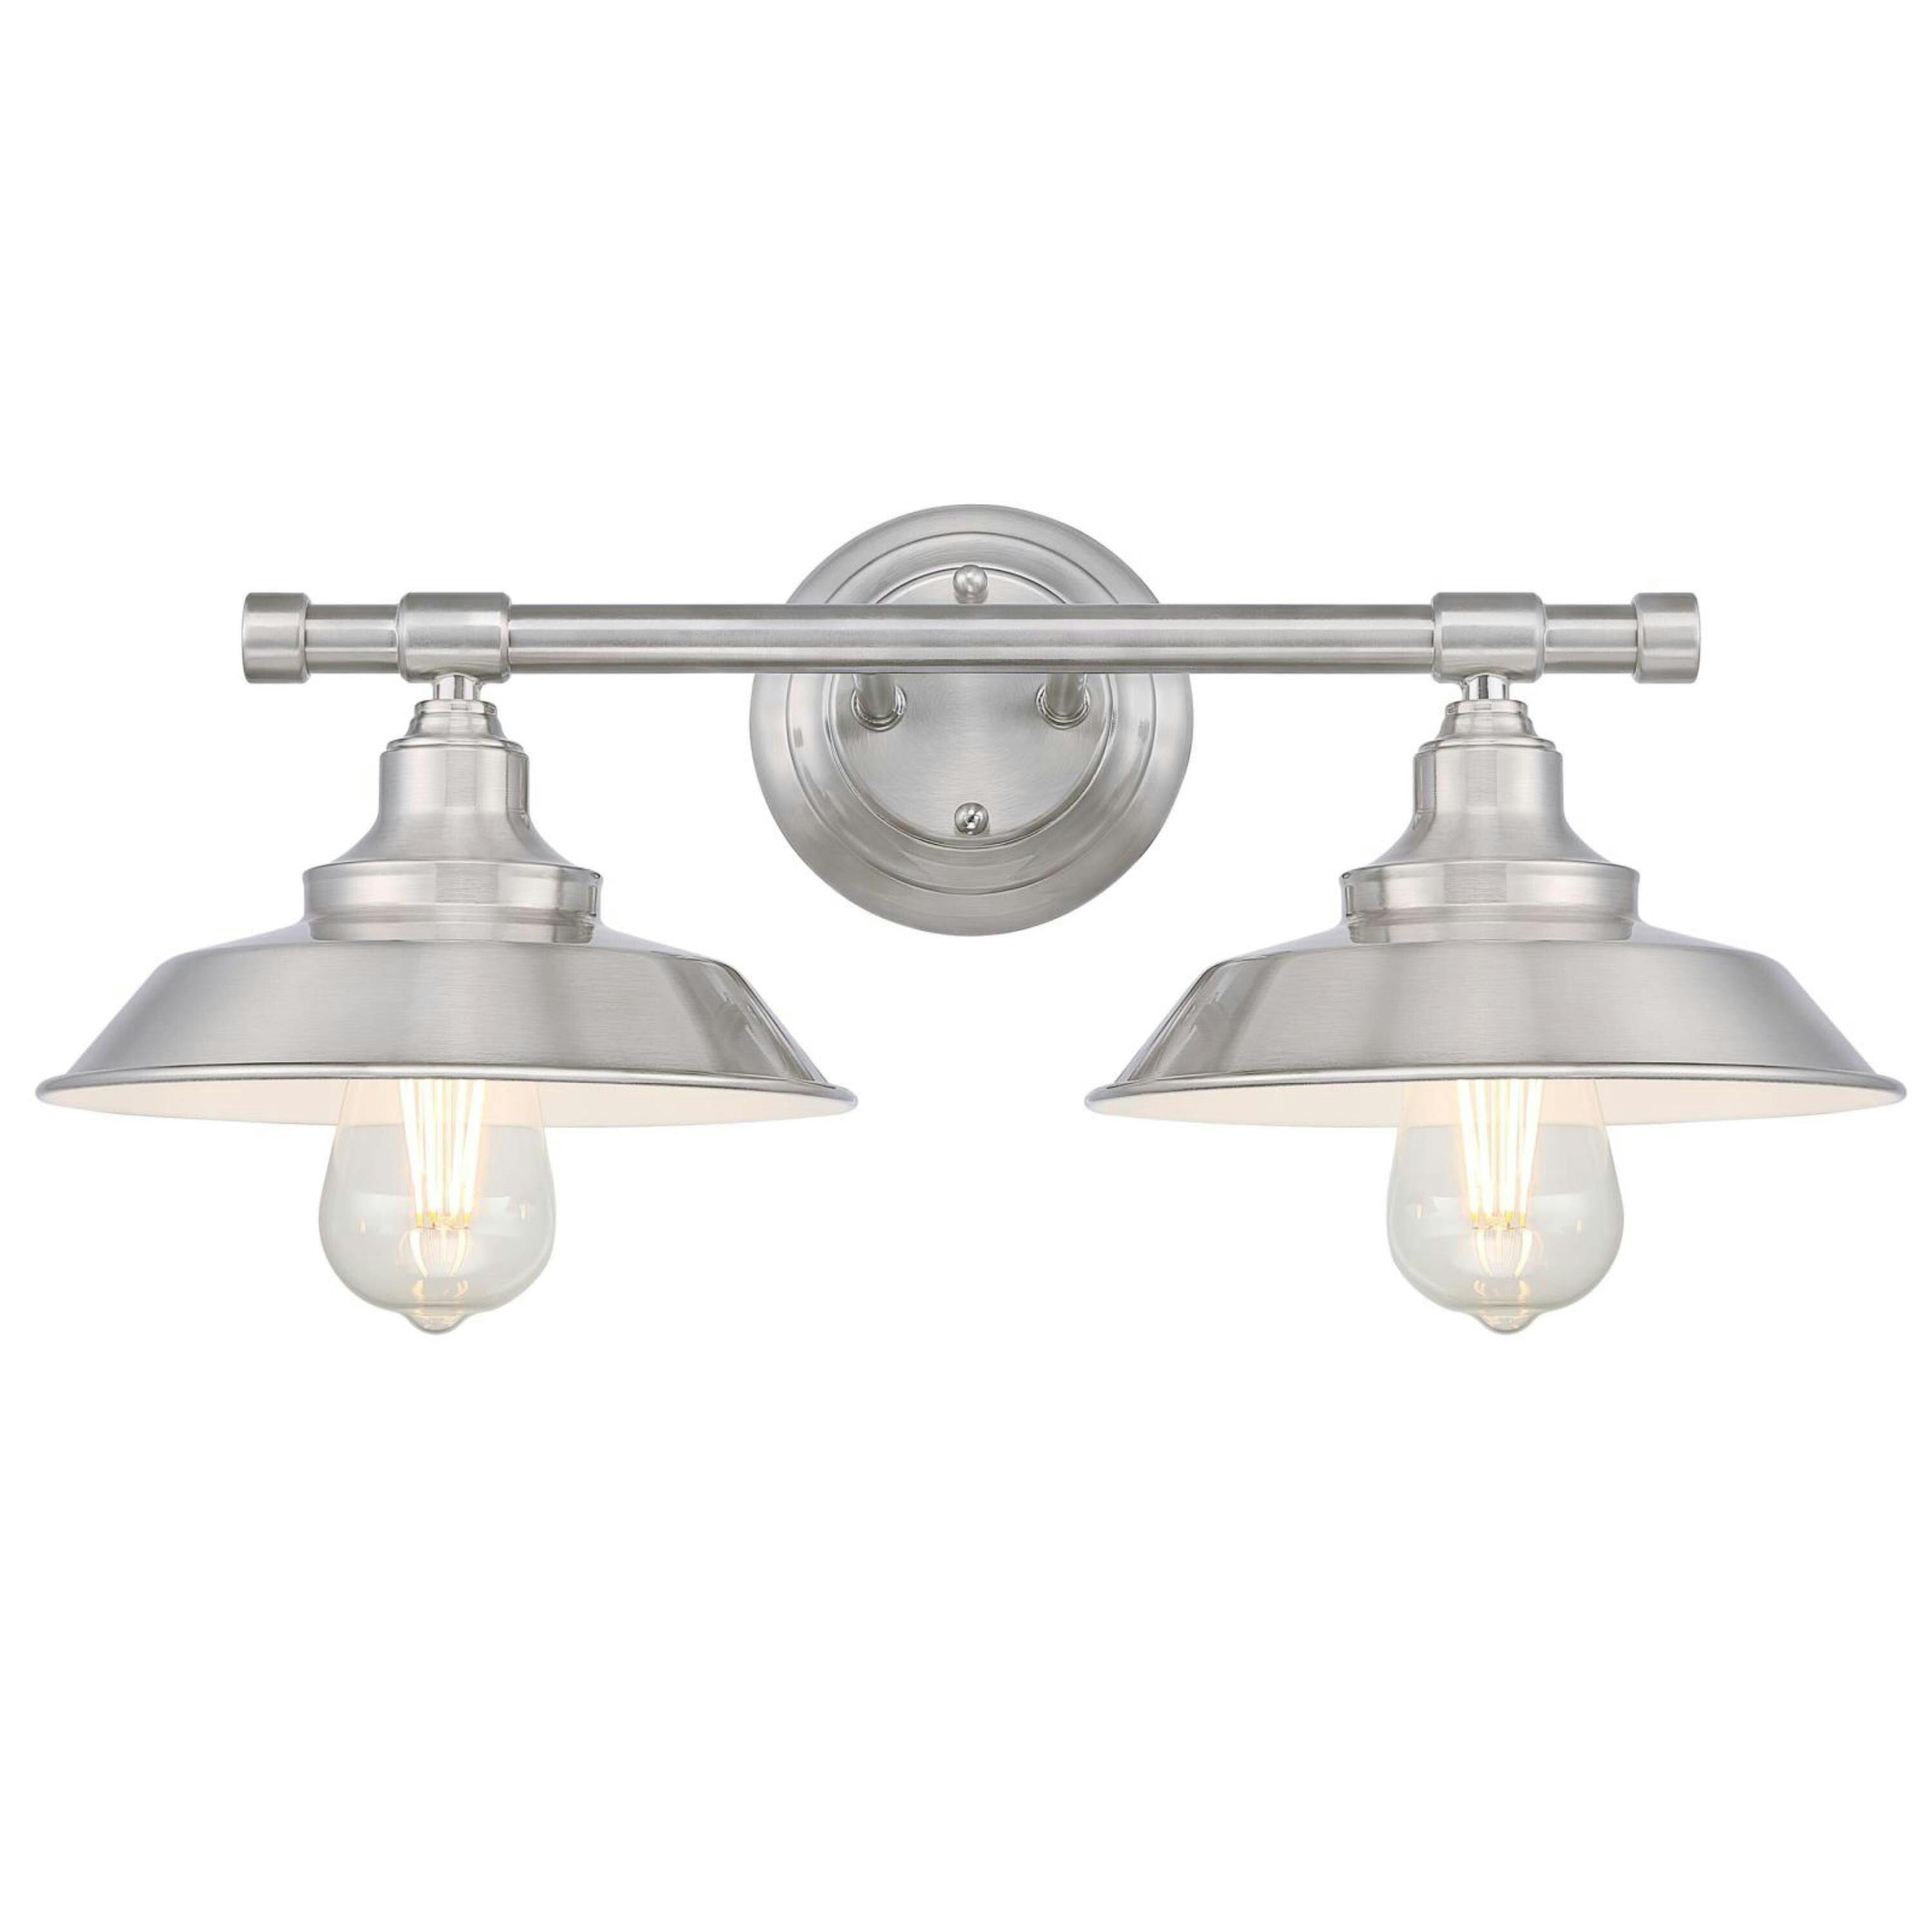 Iron Hill Modern Bell-Shaped Brushed Nickel 2-Light Wall Sconce